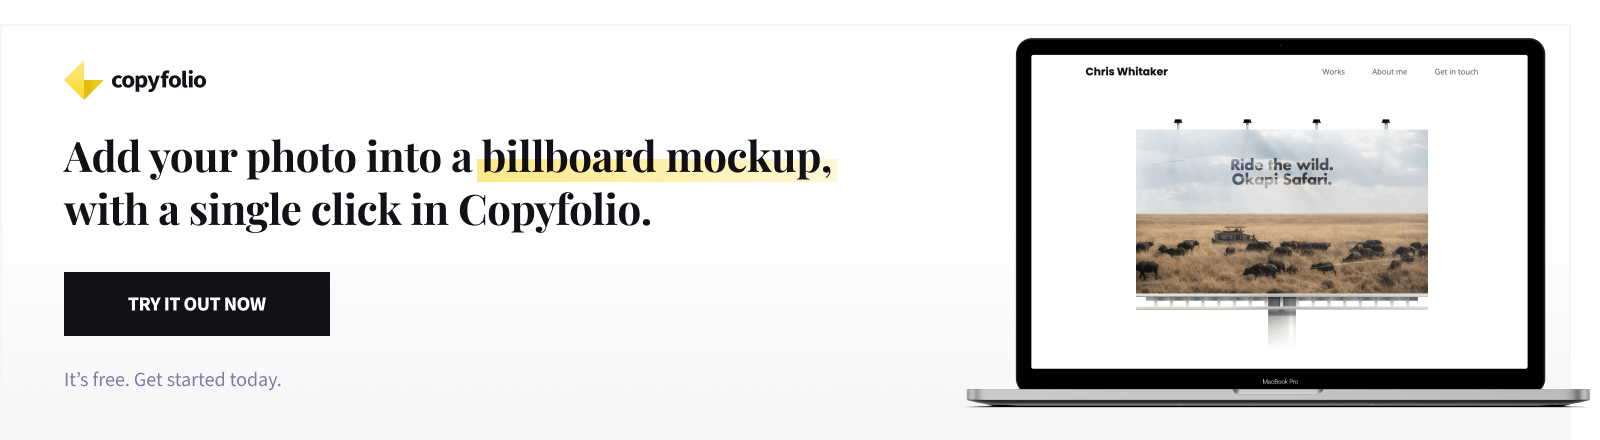 Add your photo into a billboard mockup, with a single click in Copyfolio. Try it out now.